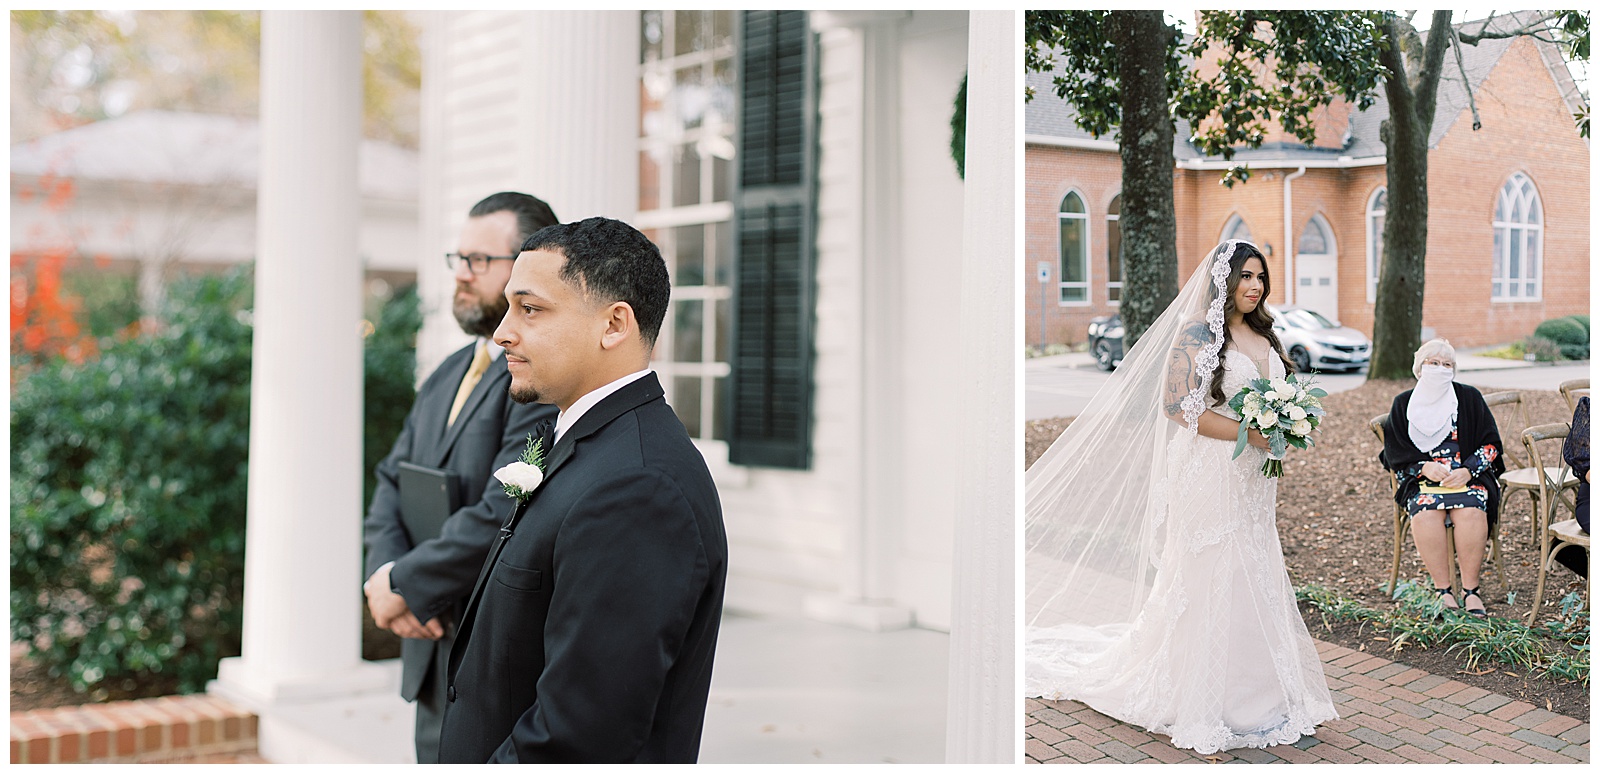 White and Greenery Filled Raleigh Micro Wedding - Mad Dash Weddings Blog